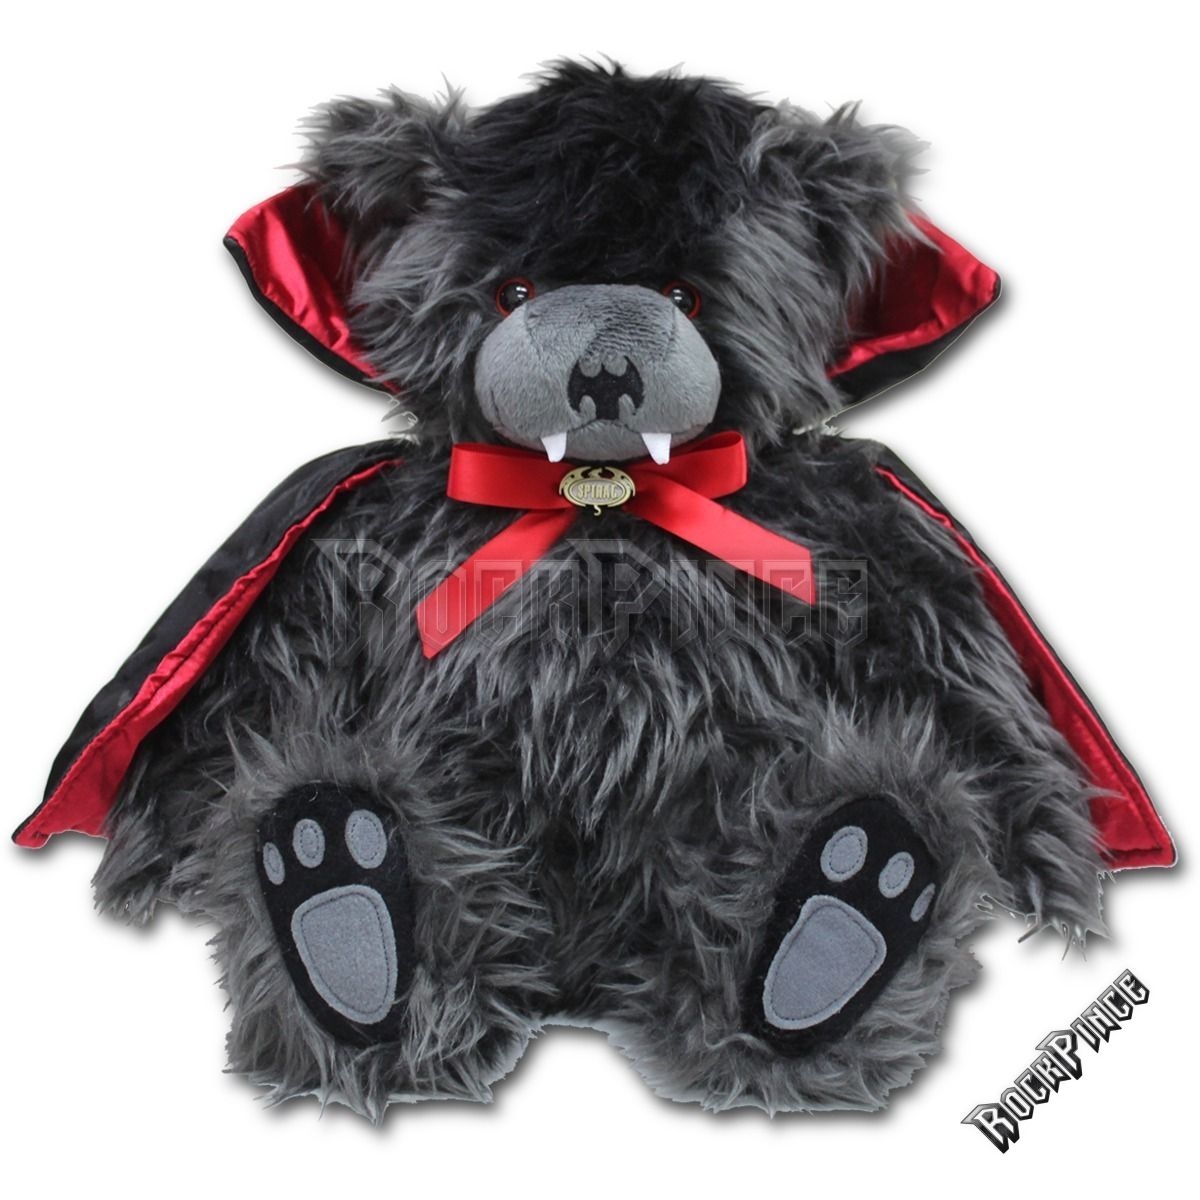 TED THE IMPALER - TEDDY BEAR - Collectable Soft Plush Toy 12 inch - F028A851